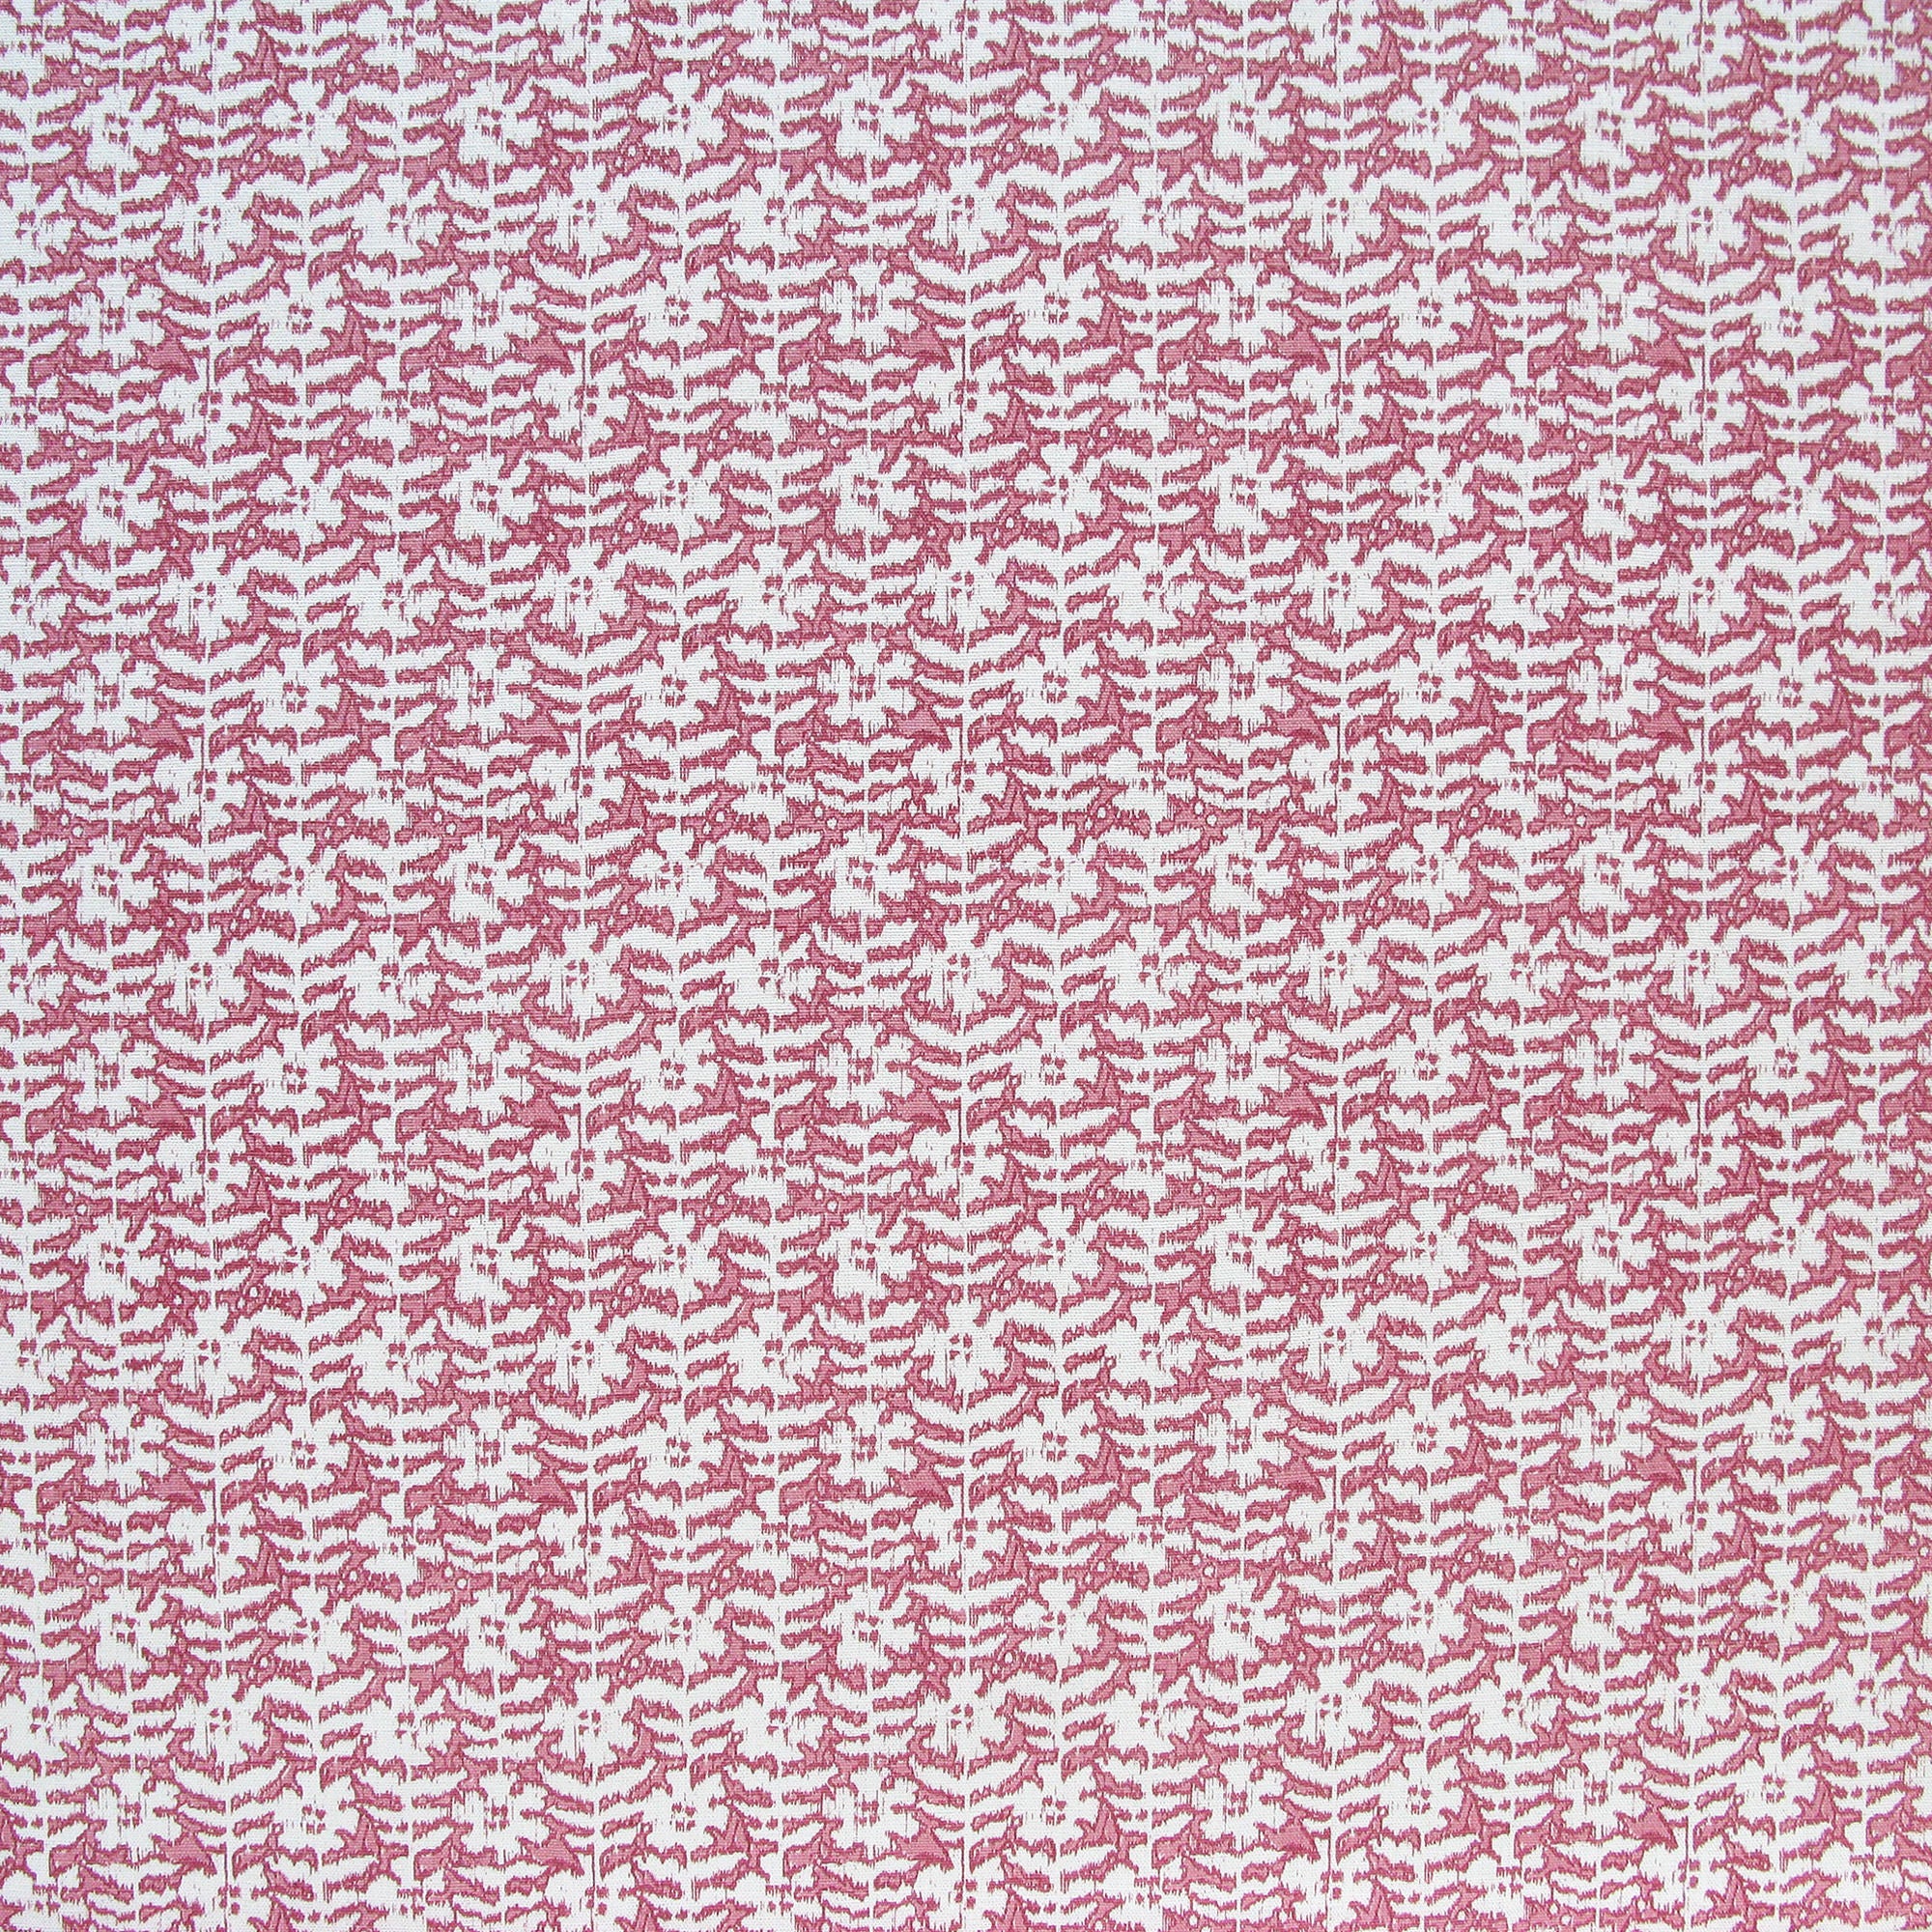 Detail of fabric in a floral grid print in white and red on a pink field.